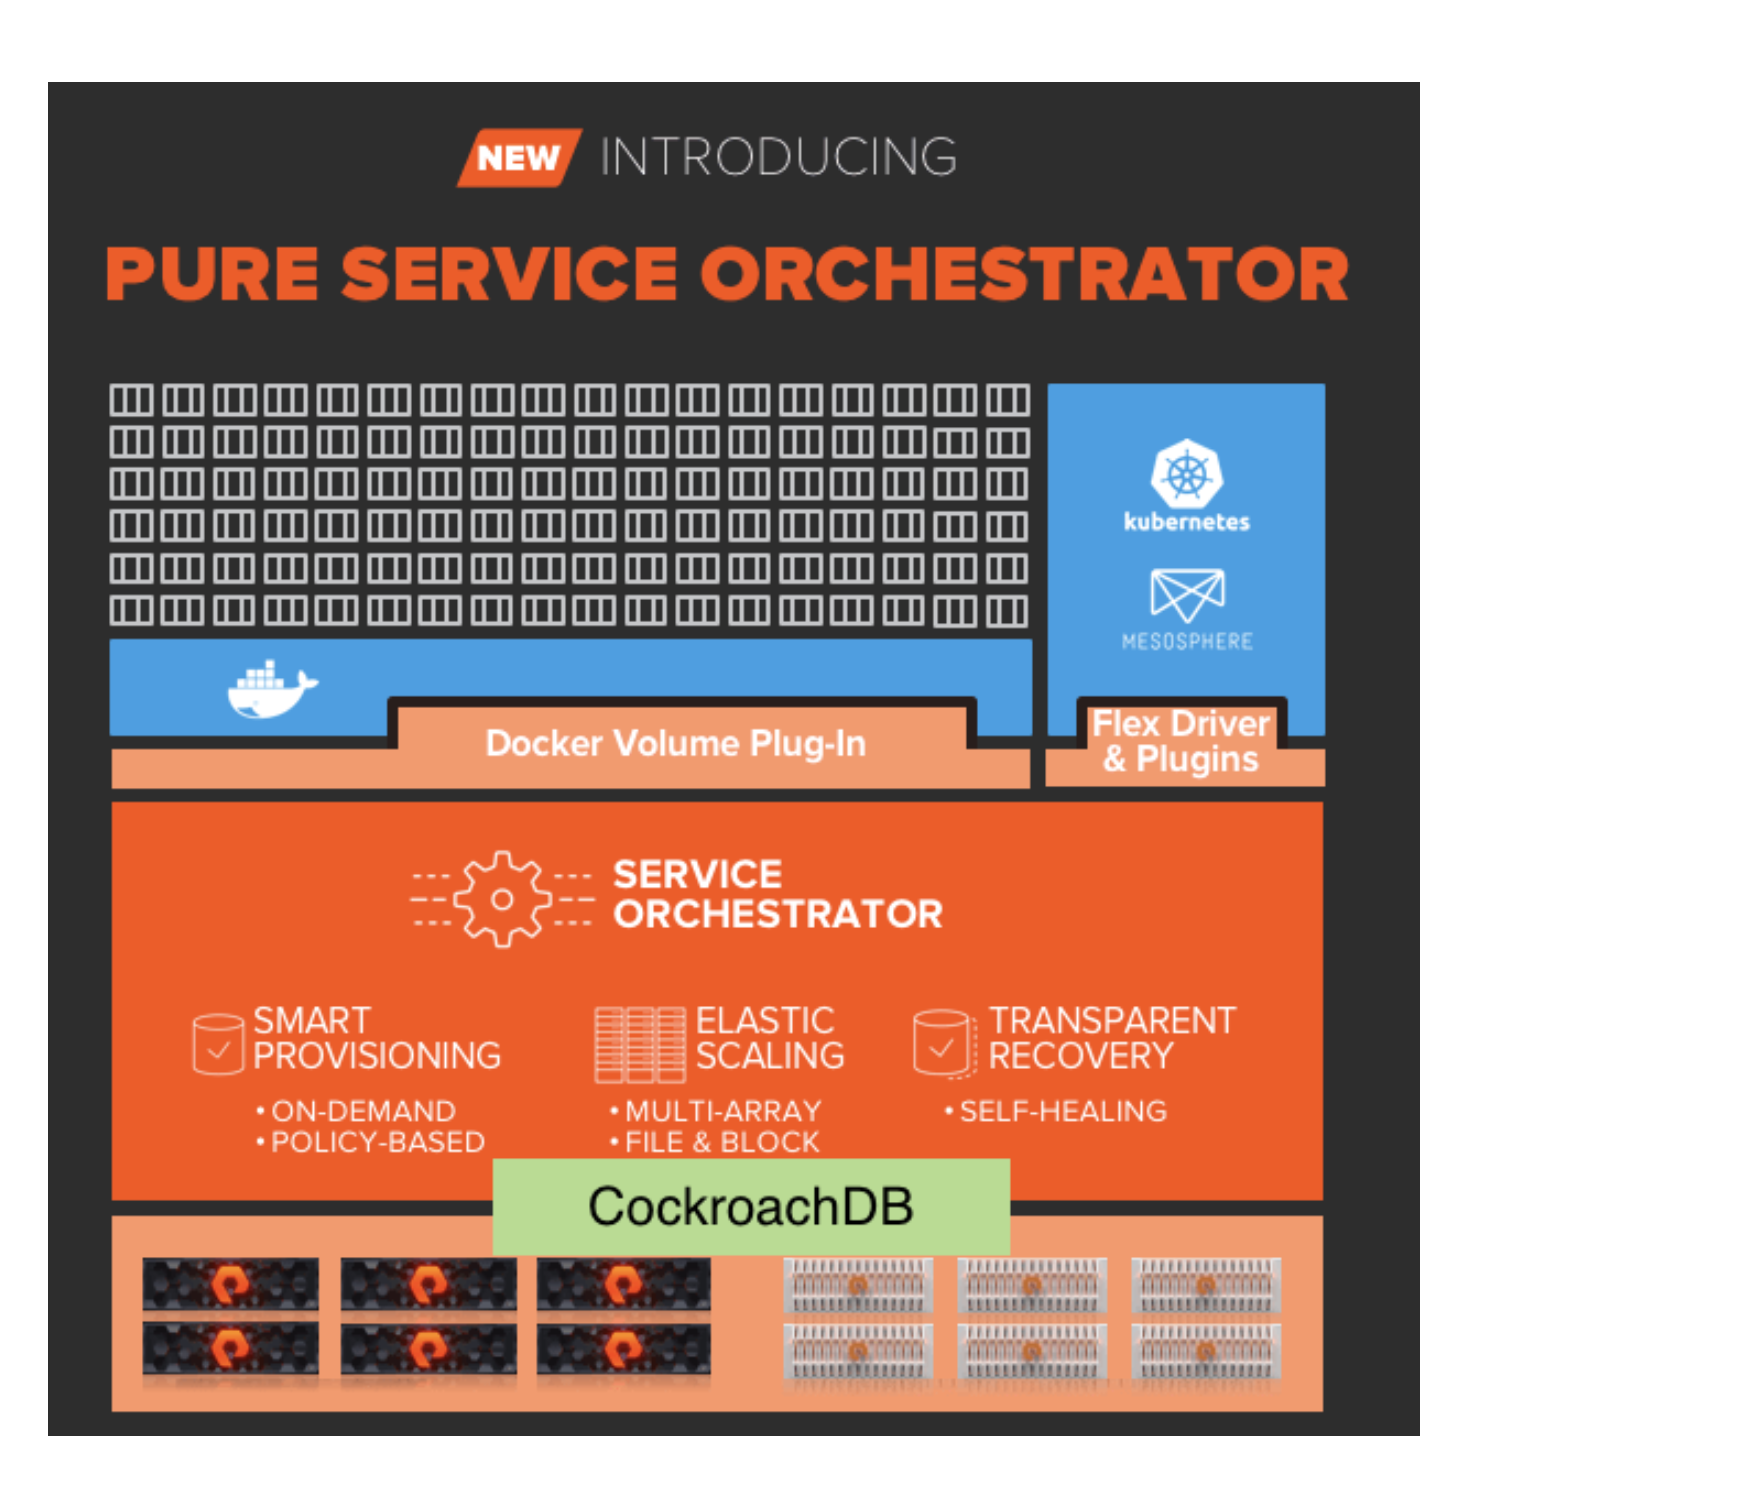 Pure Service Orchestrator Architecture with CockroachDB & Kubernetes